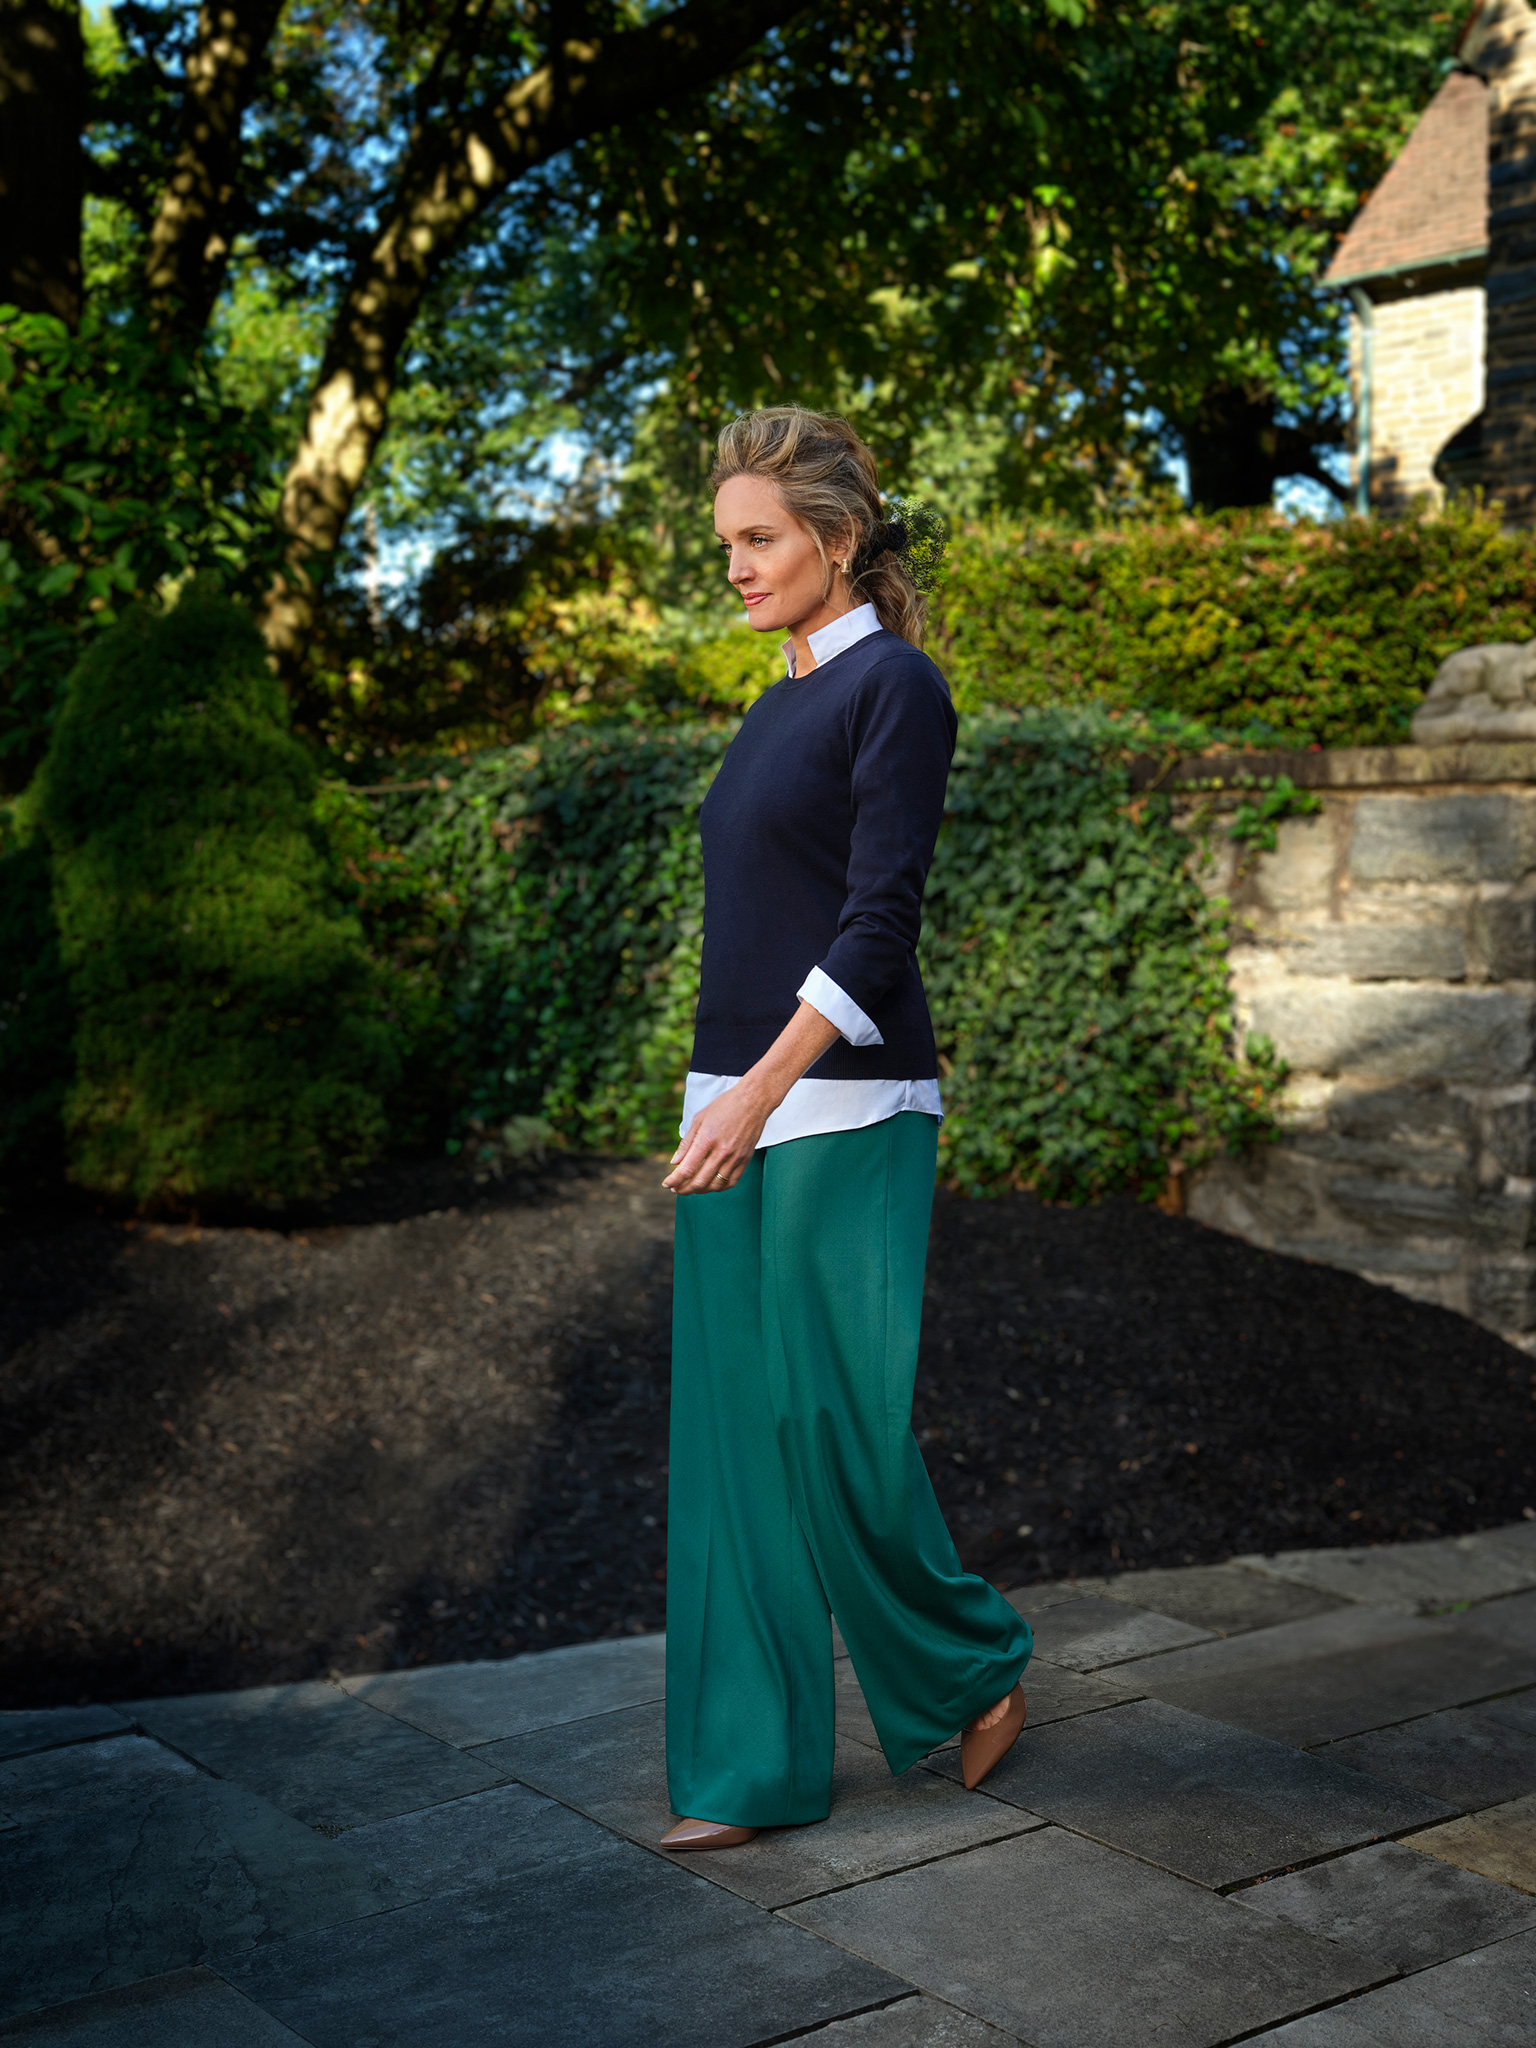 Today's Everyday Fashion: Luck of the Irish | Js everyday fashion, Everyday  fashion, Fashion